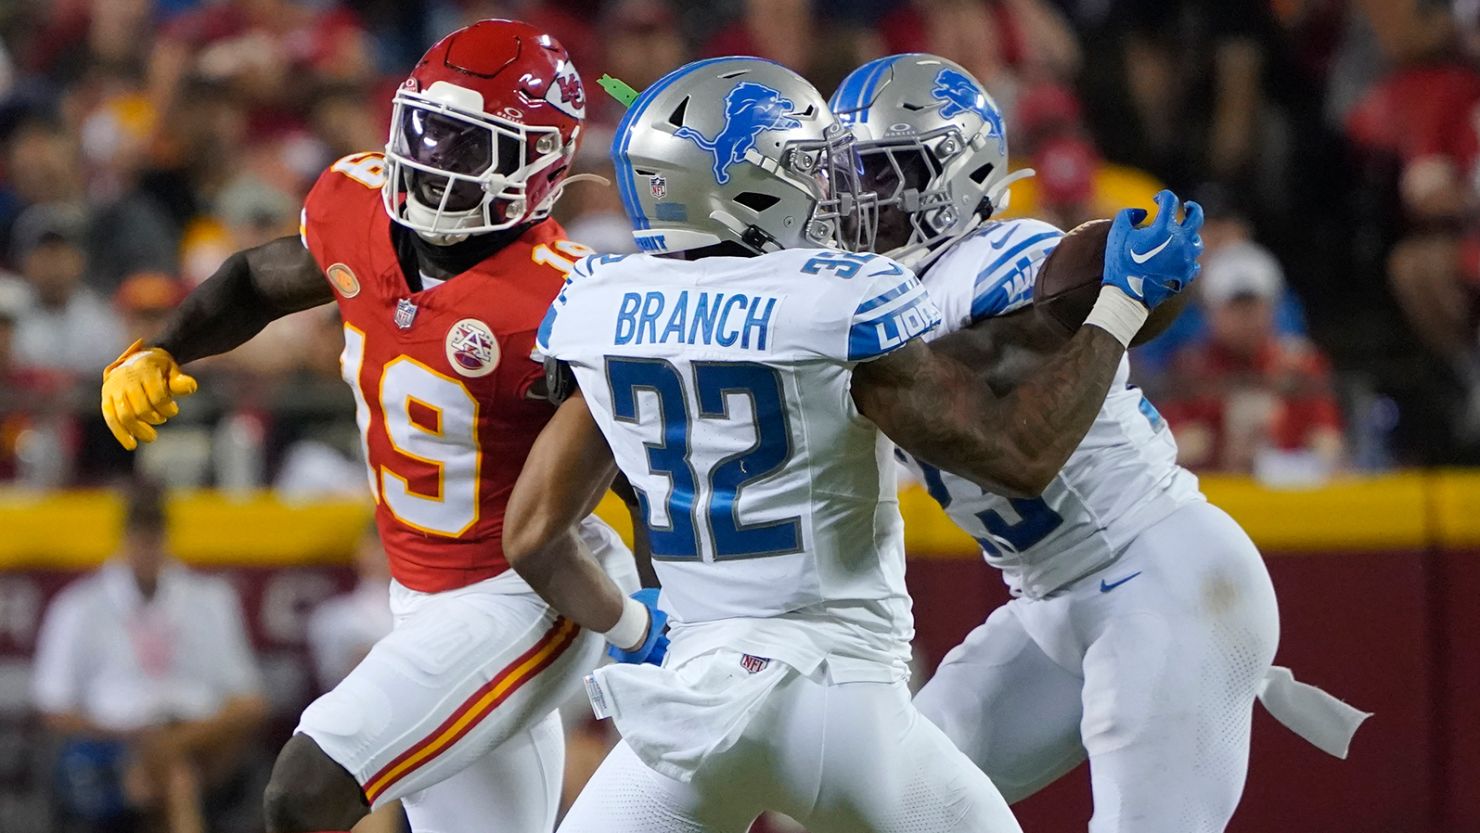 Really big challenge: Detroit Lions travel to play defending Super Bowl  champ Kansas City Chiefs tonight to open entire NFL season